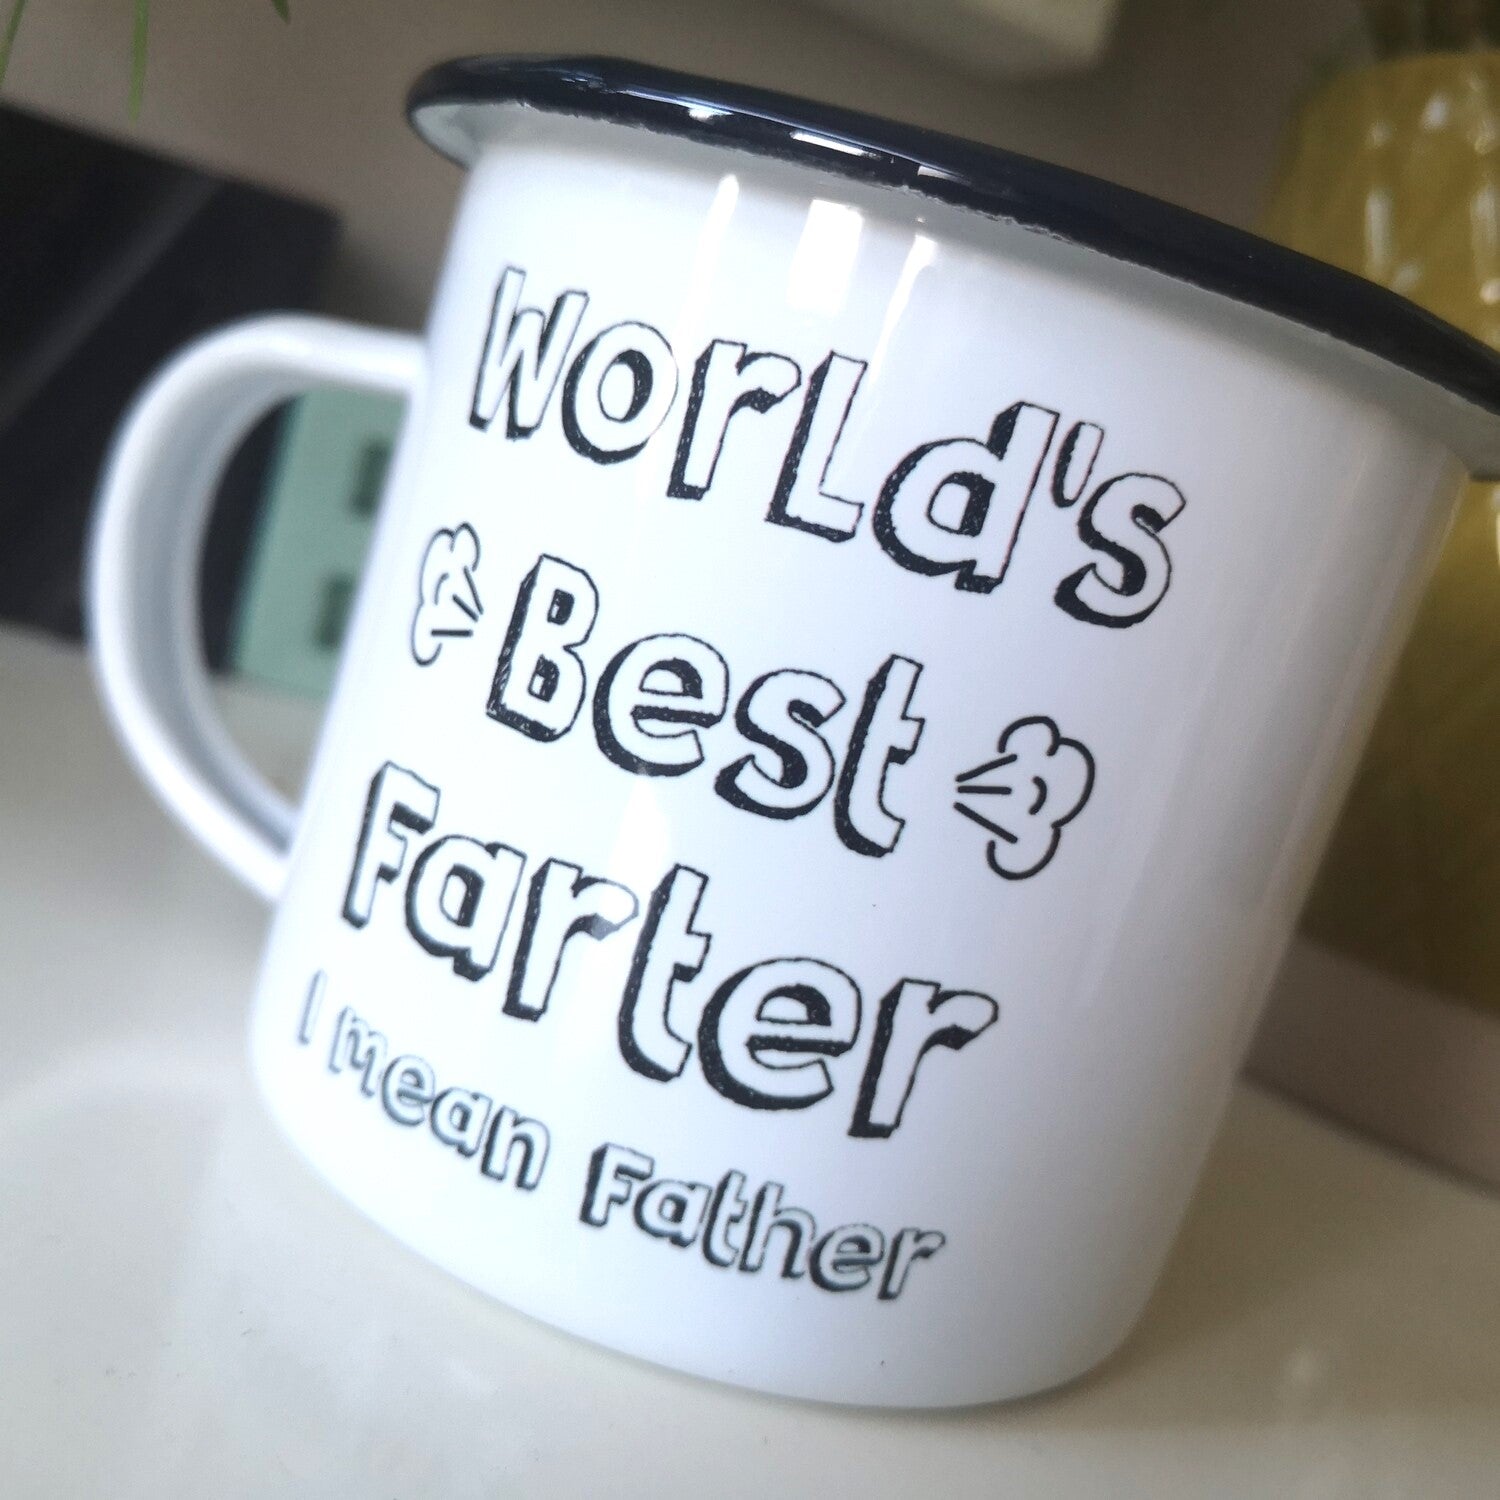 A close up of a White enamel mug with a black rim with the following on the front - World's Best Farter, I mean Father